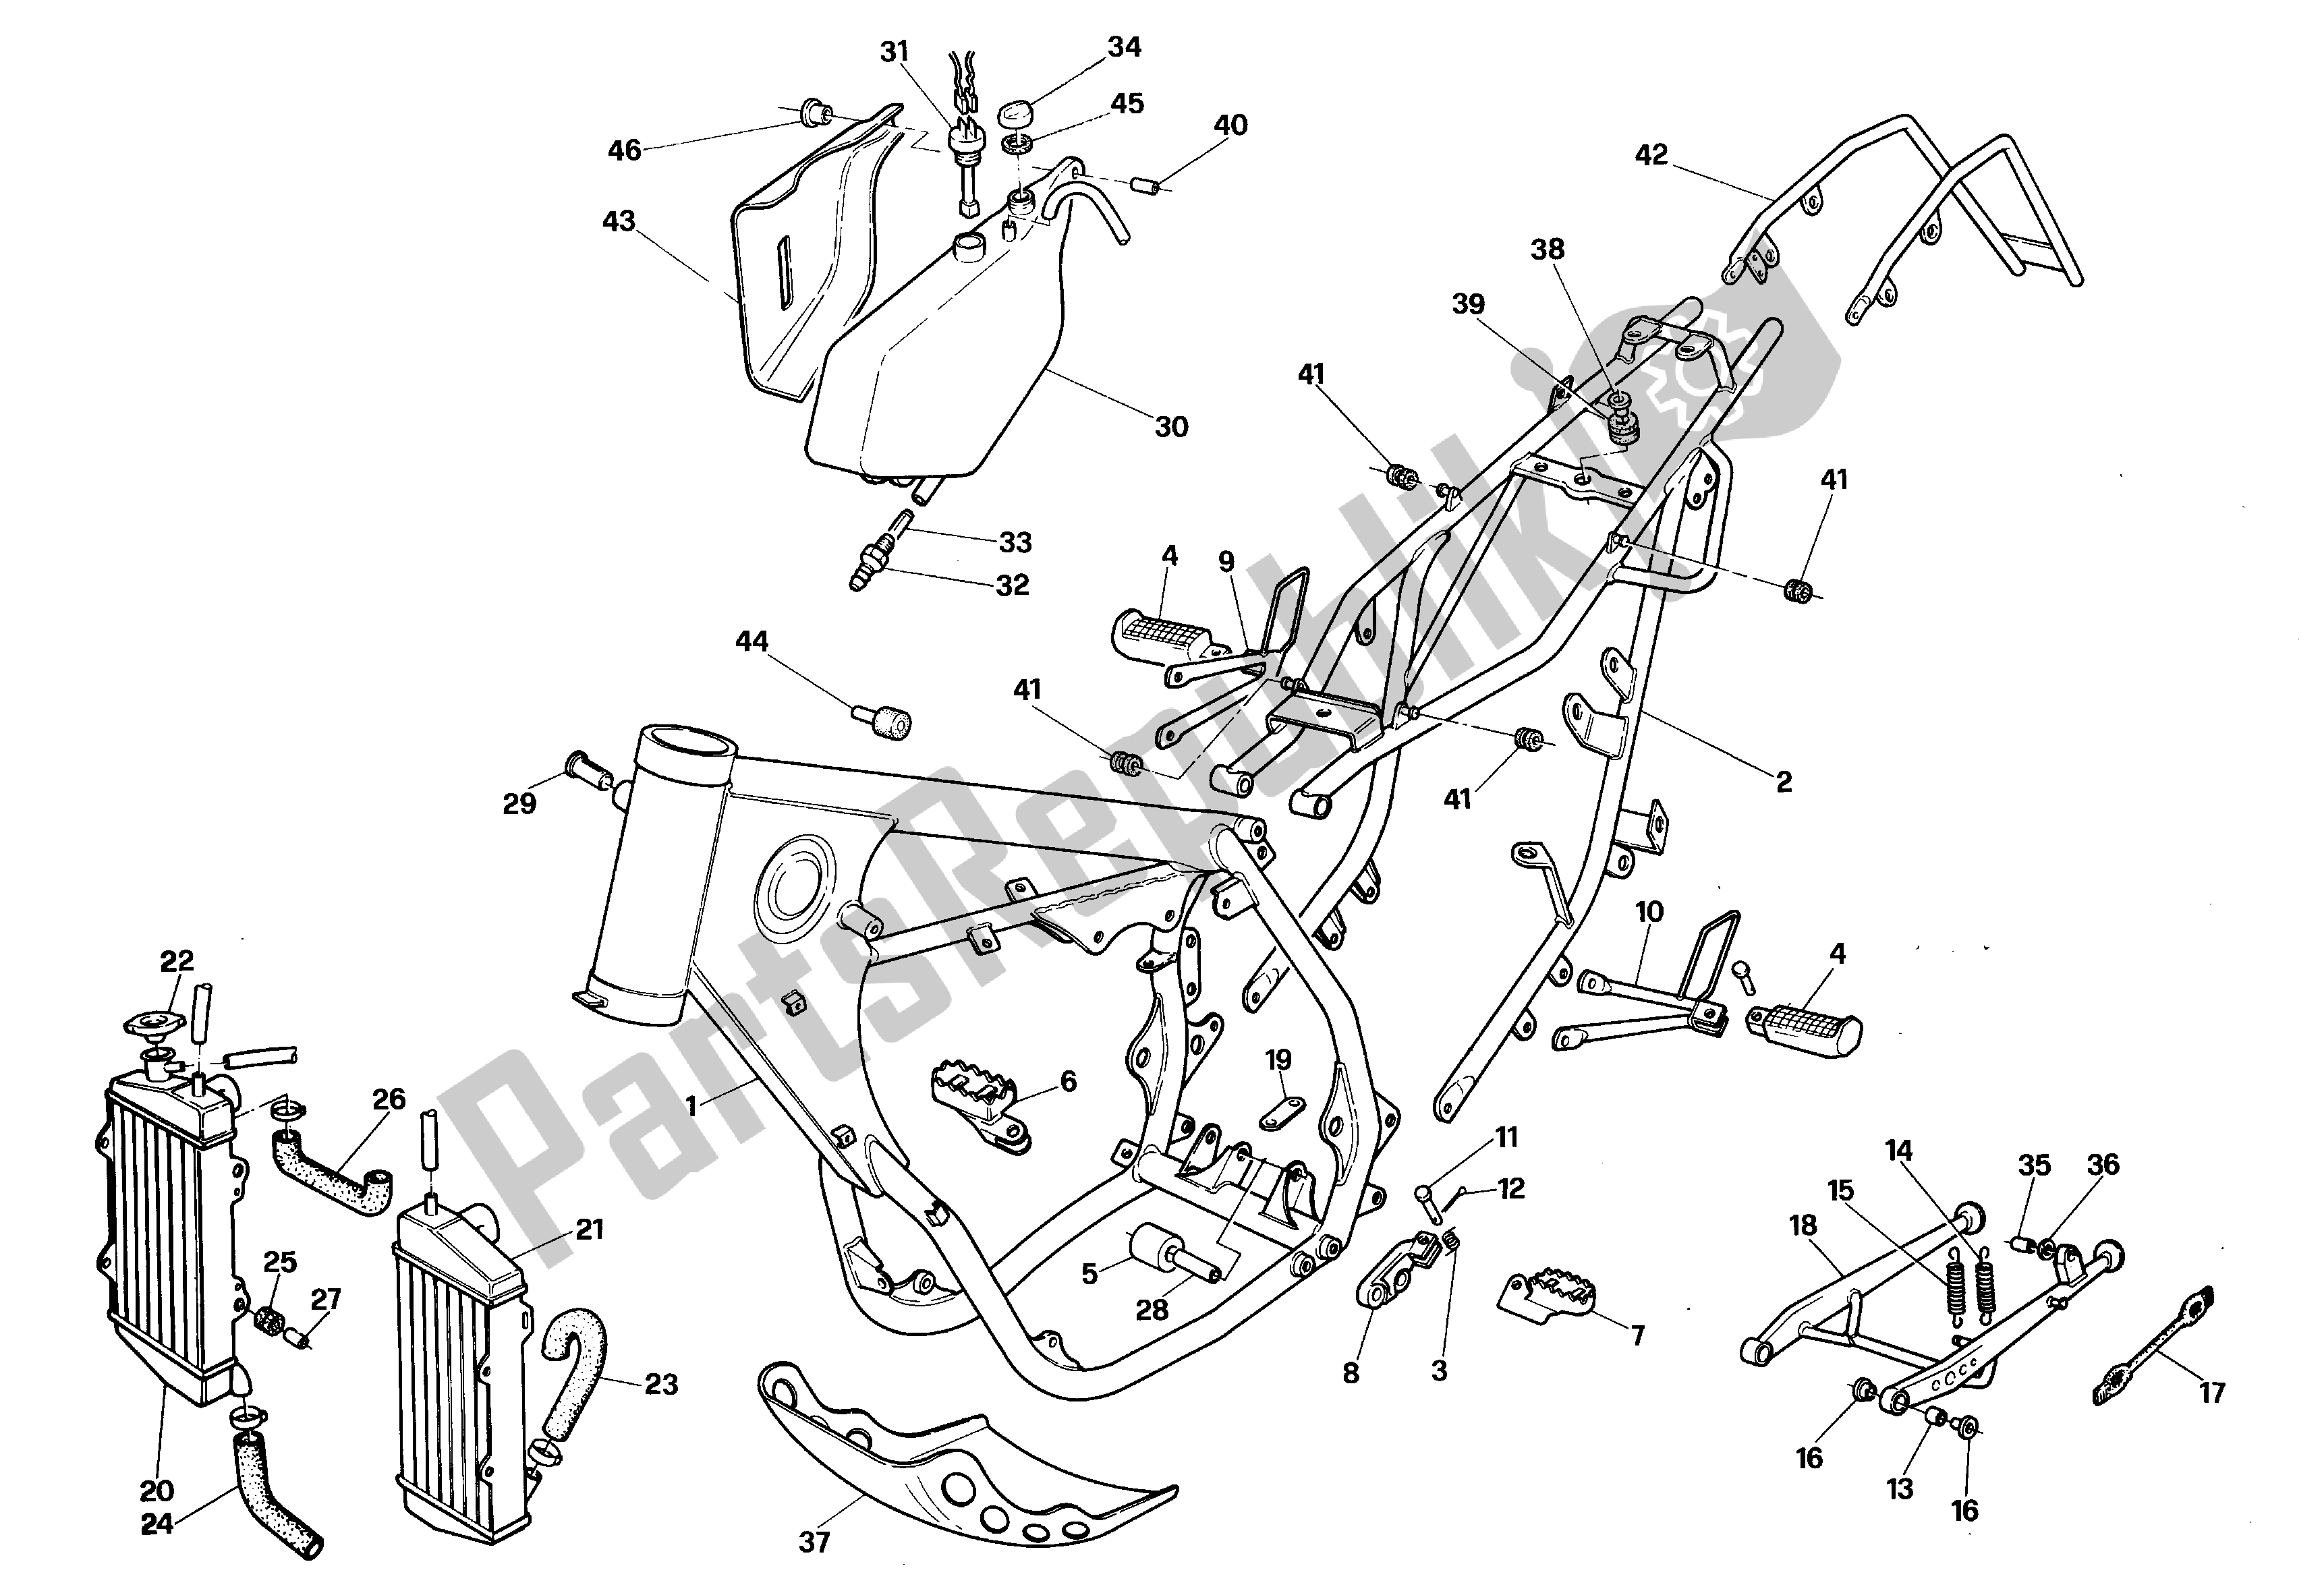 All parts for the Frame of the Aprilia RX 125 1991